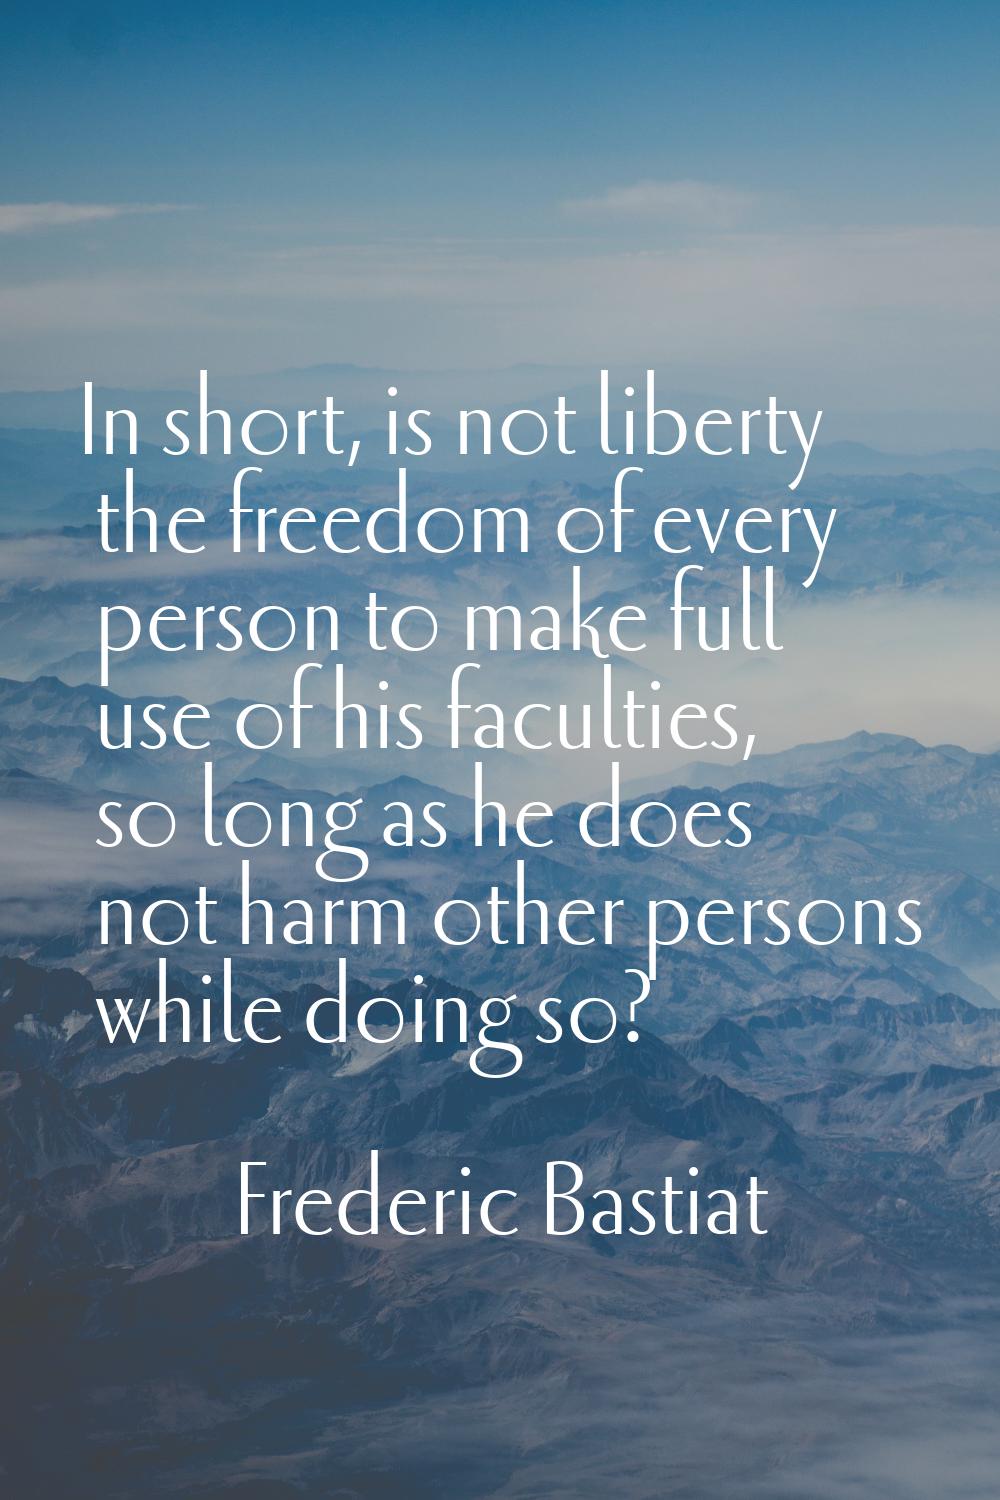 In short, is not liberty the freedom of every person to make full use of his faculties, so long as 